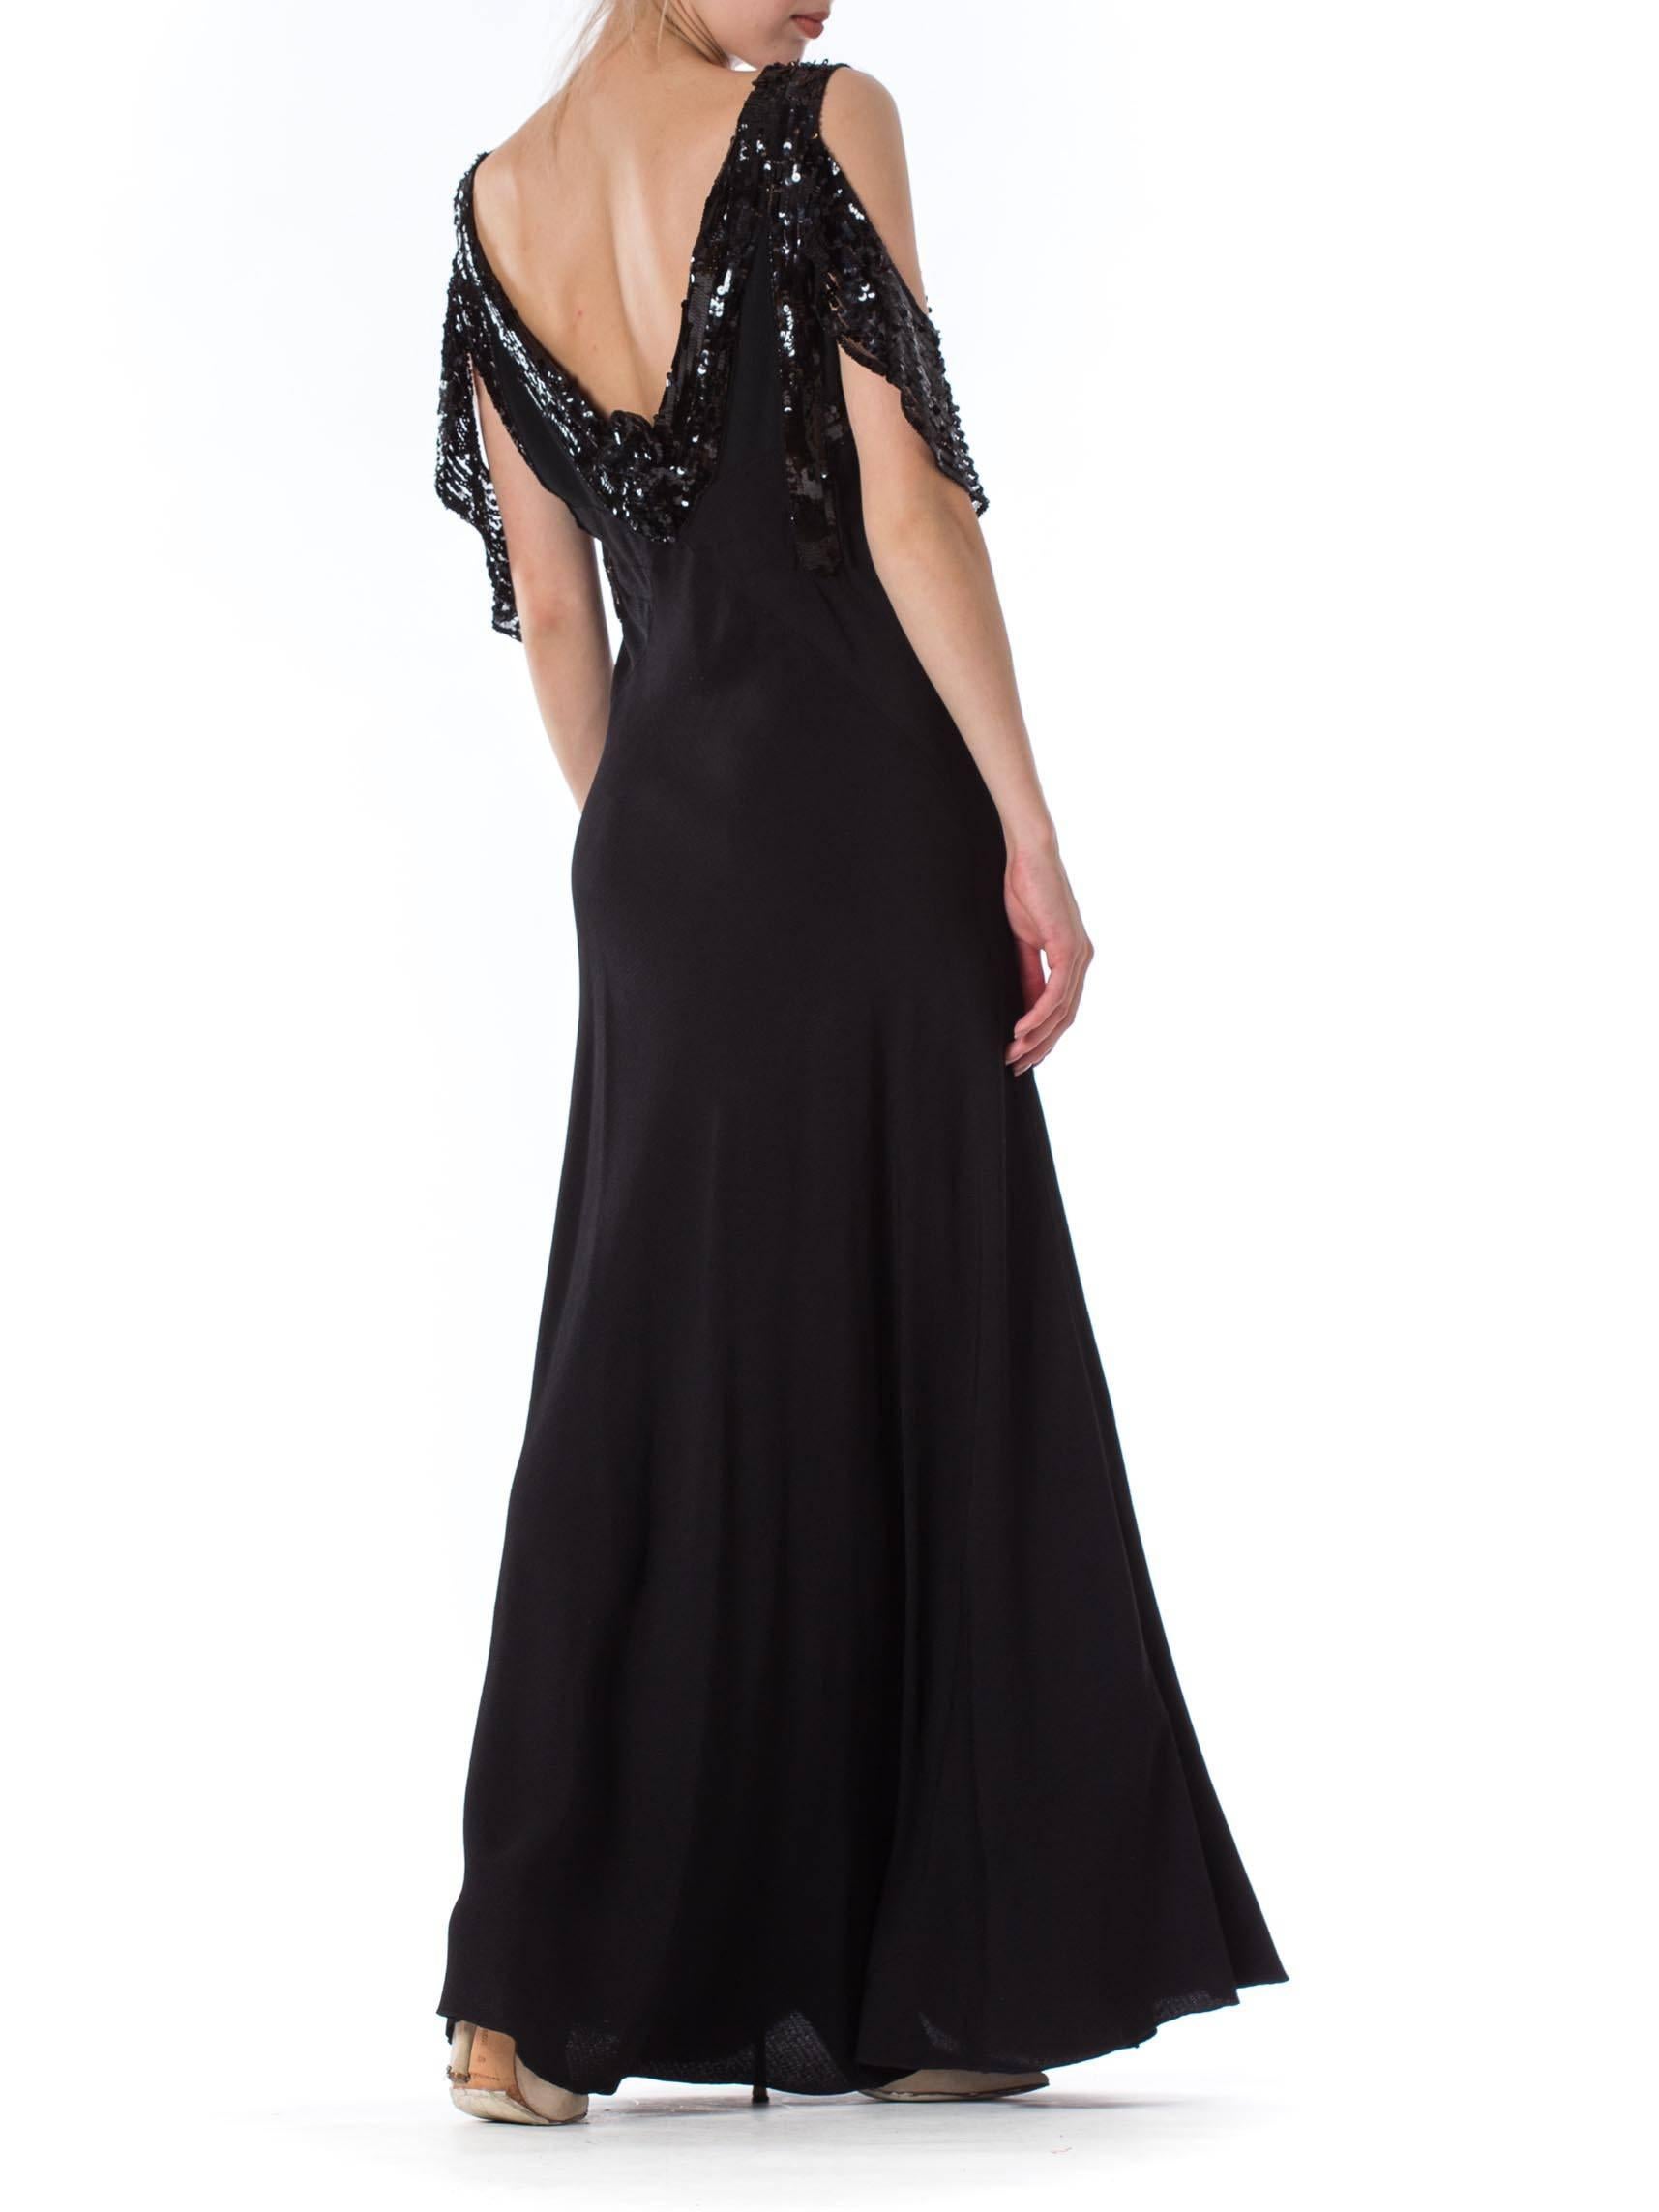 Women's 1930S Black Bias Cut Rayon Crepe Gown With Celluloid Sequin Peek-A-Boo Sleeves For Sale